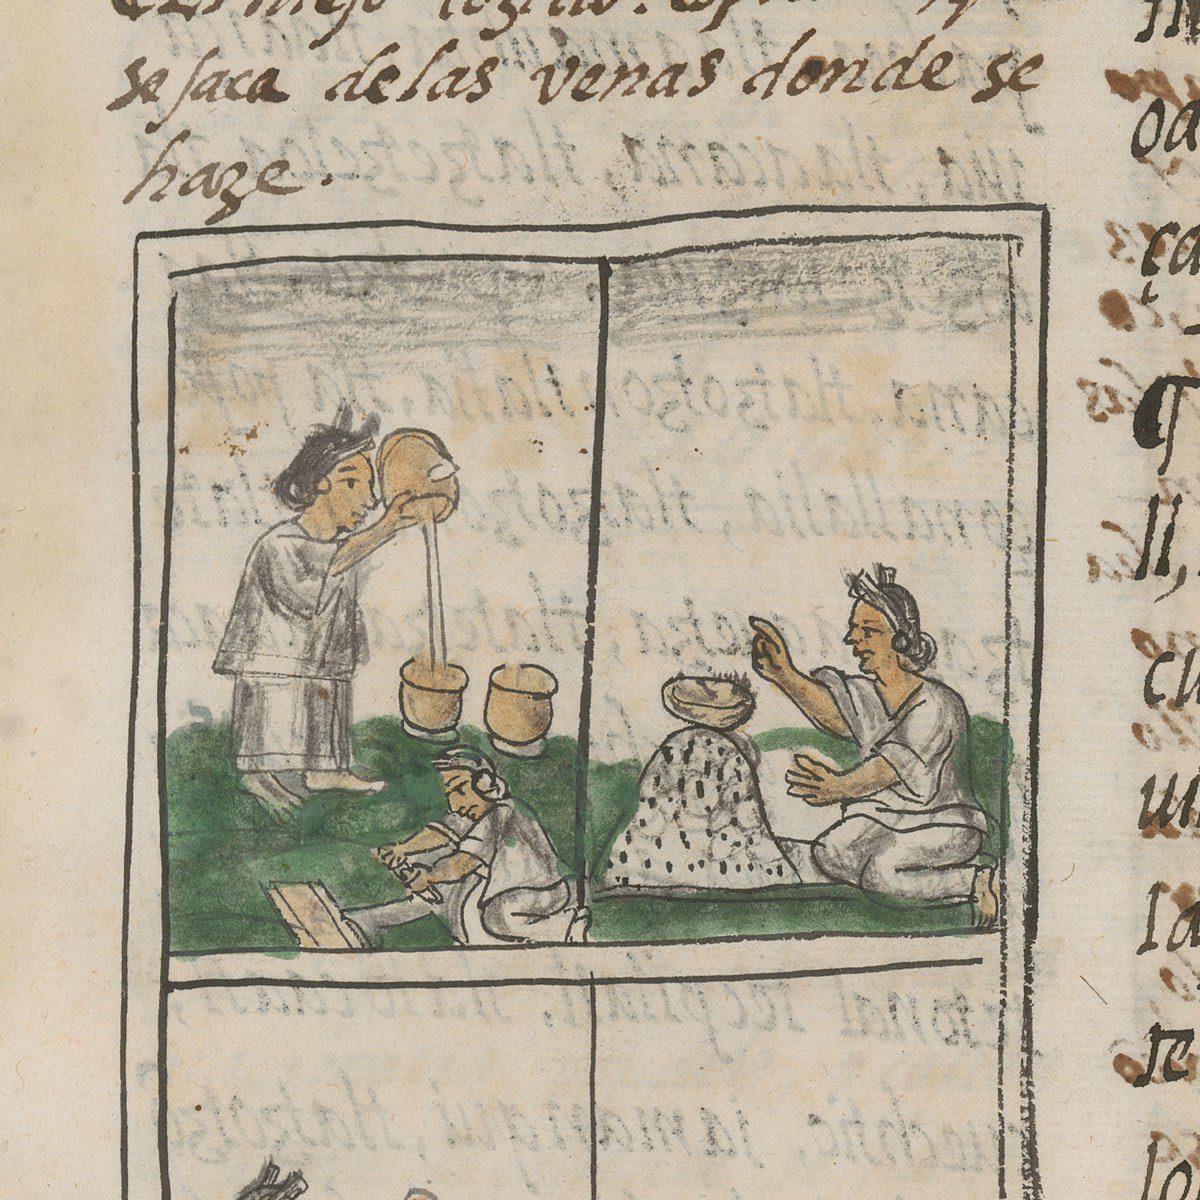 Today is #WorldChocolateDay. Here is an illustration of a woman frothing chocolate from the Florentine Codex, a 16th-century Nahuatl-Spanish encyclopedia. Central Mexican Nahuas drank it unsweetened, and would froth the beverage by pouring the drink from one vessel to another.